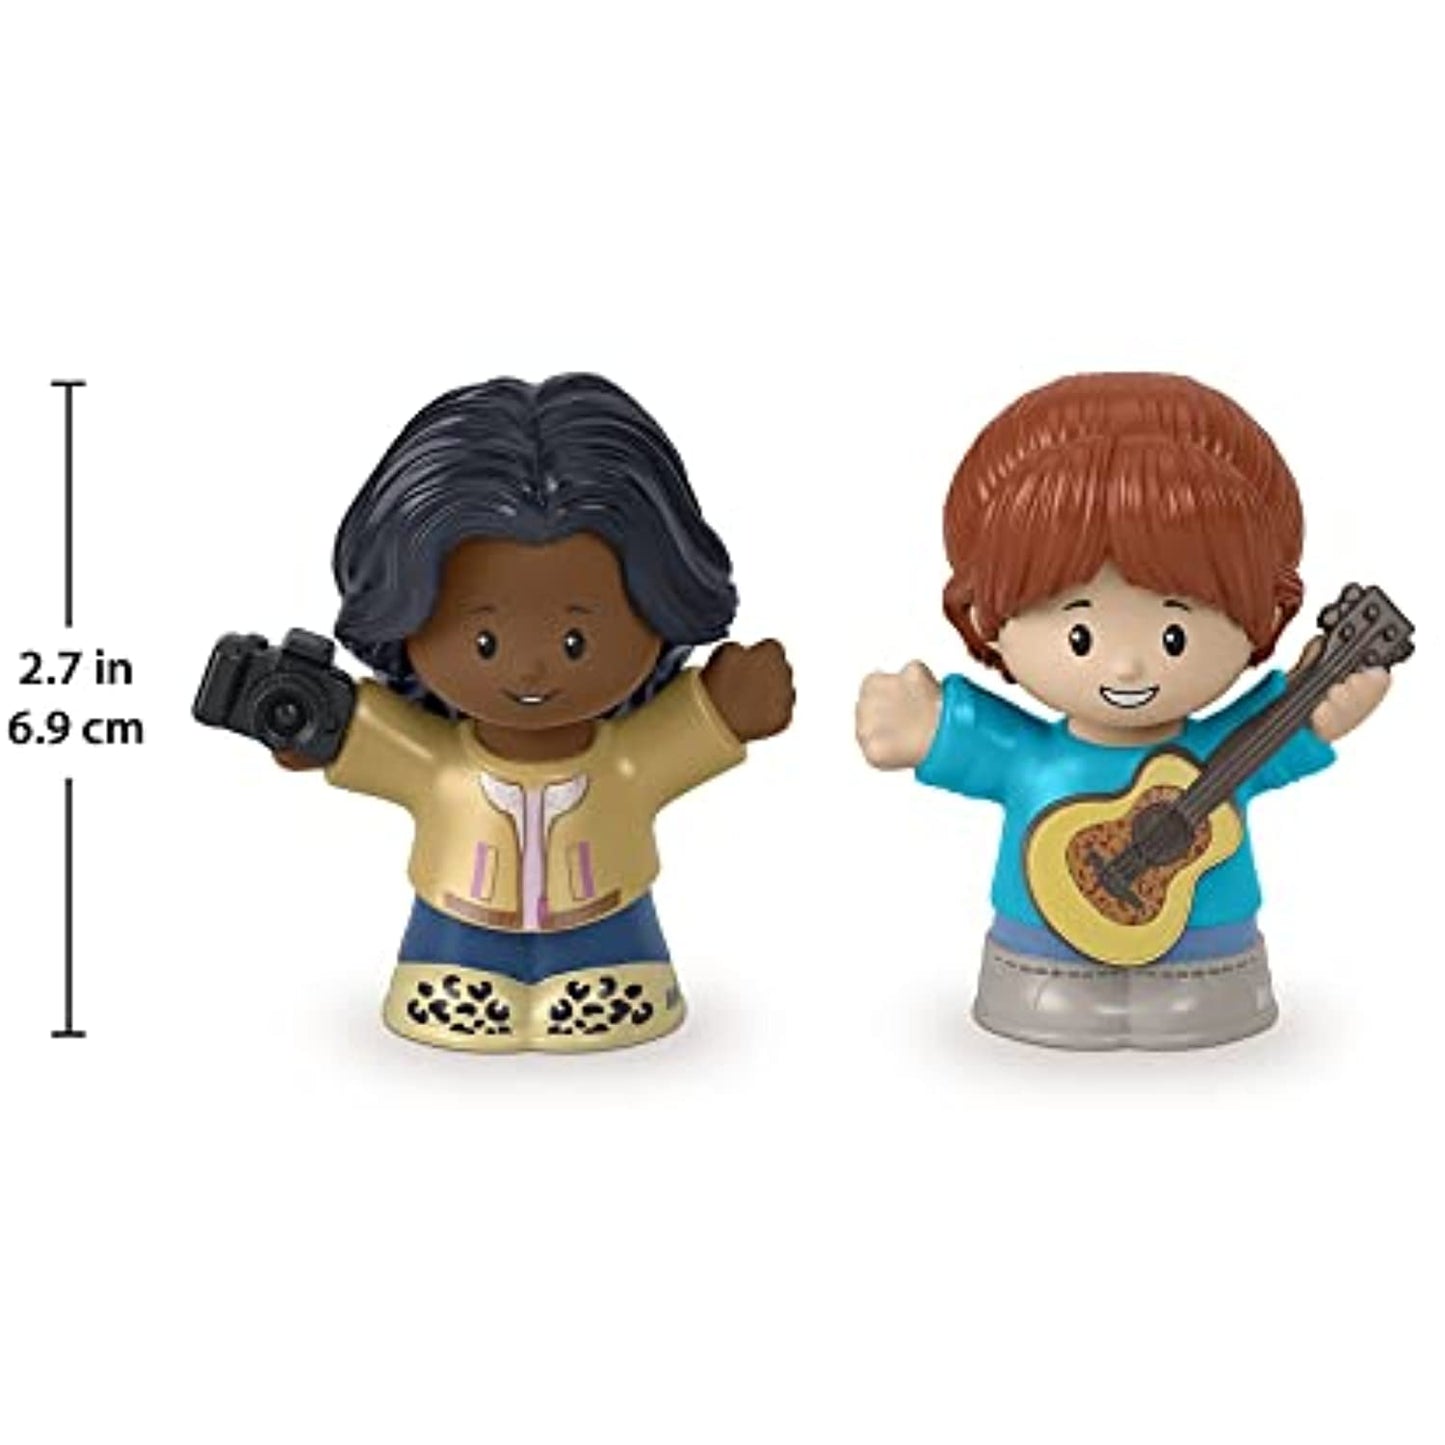 Fisher-Price Little People Photographer and Guitar Player Figures Play Set